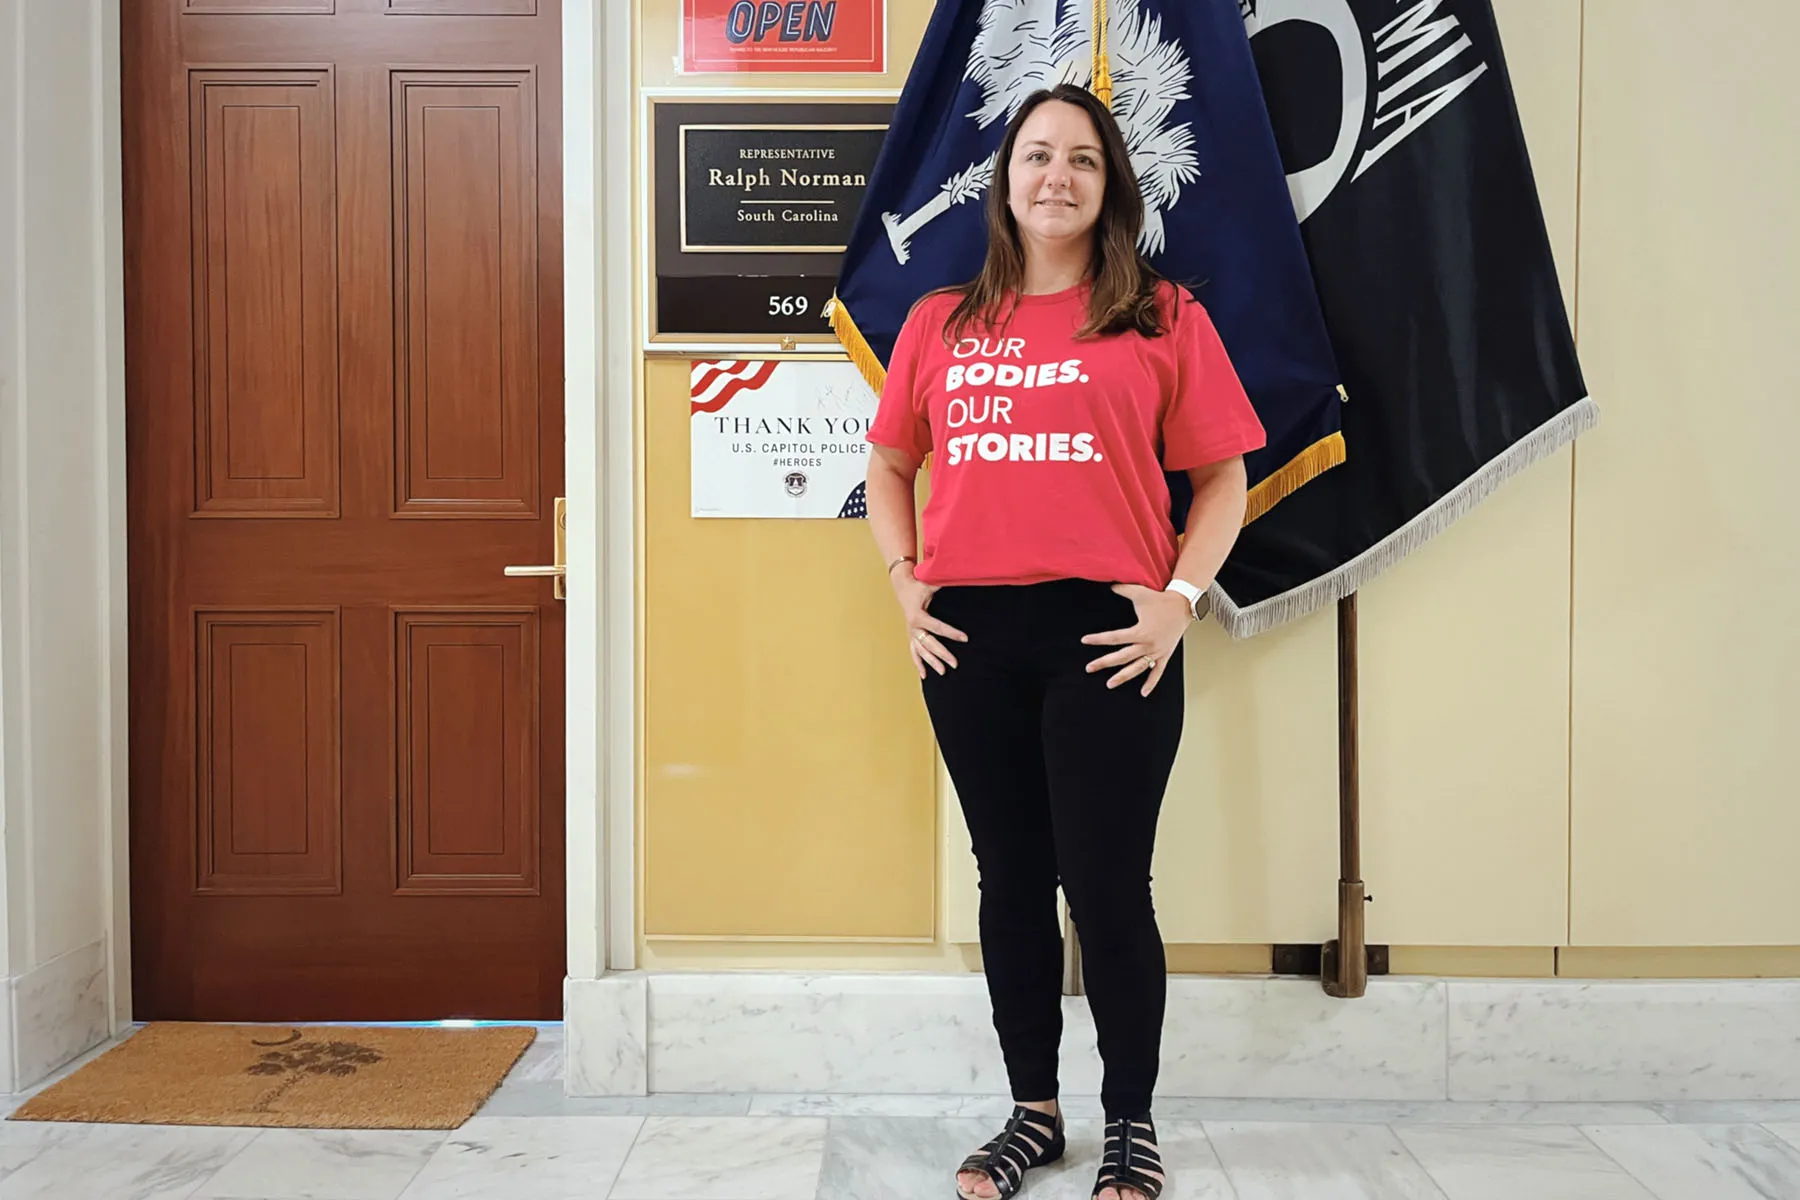 Lacey Layne poses for a portrait in front of the office of Rep. Ralph Norman.